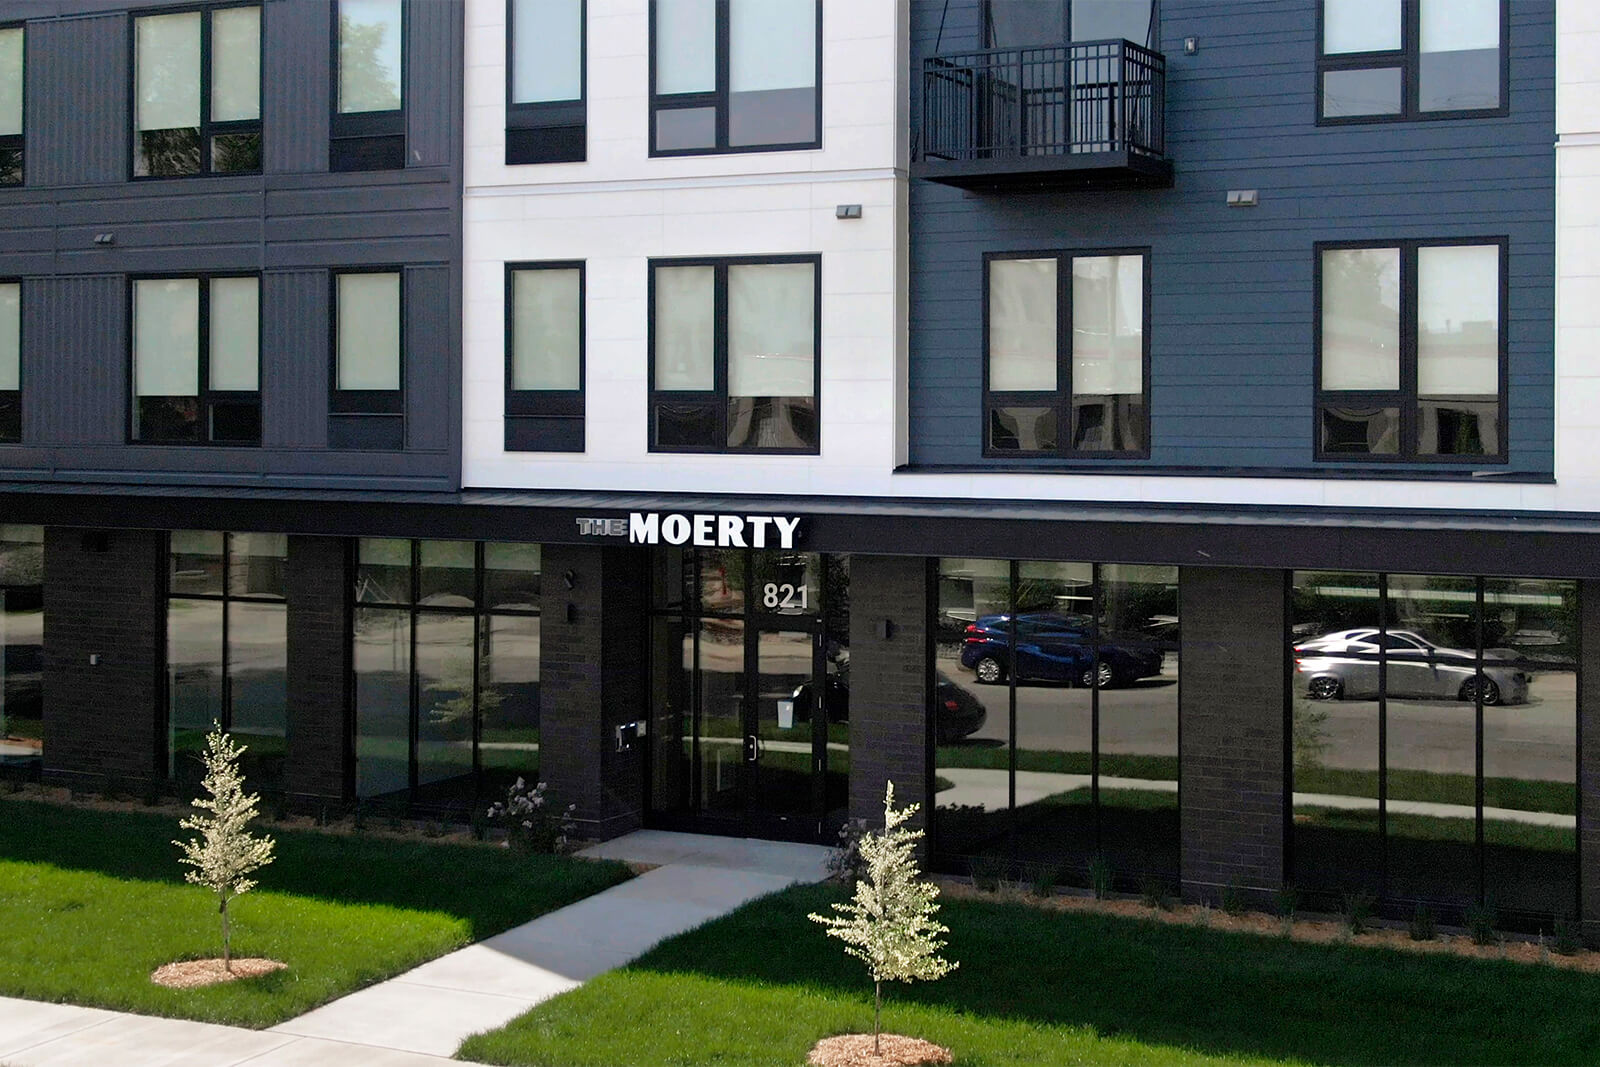 Welcome to The Moerty - Building Entrance